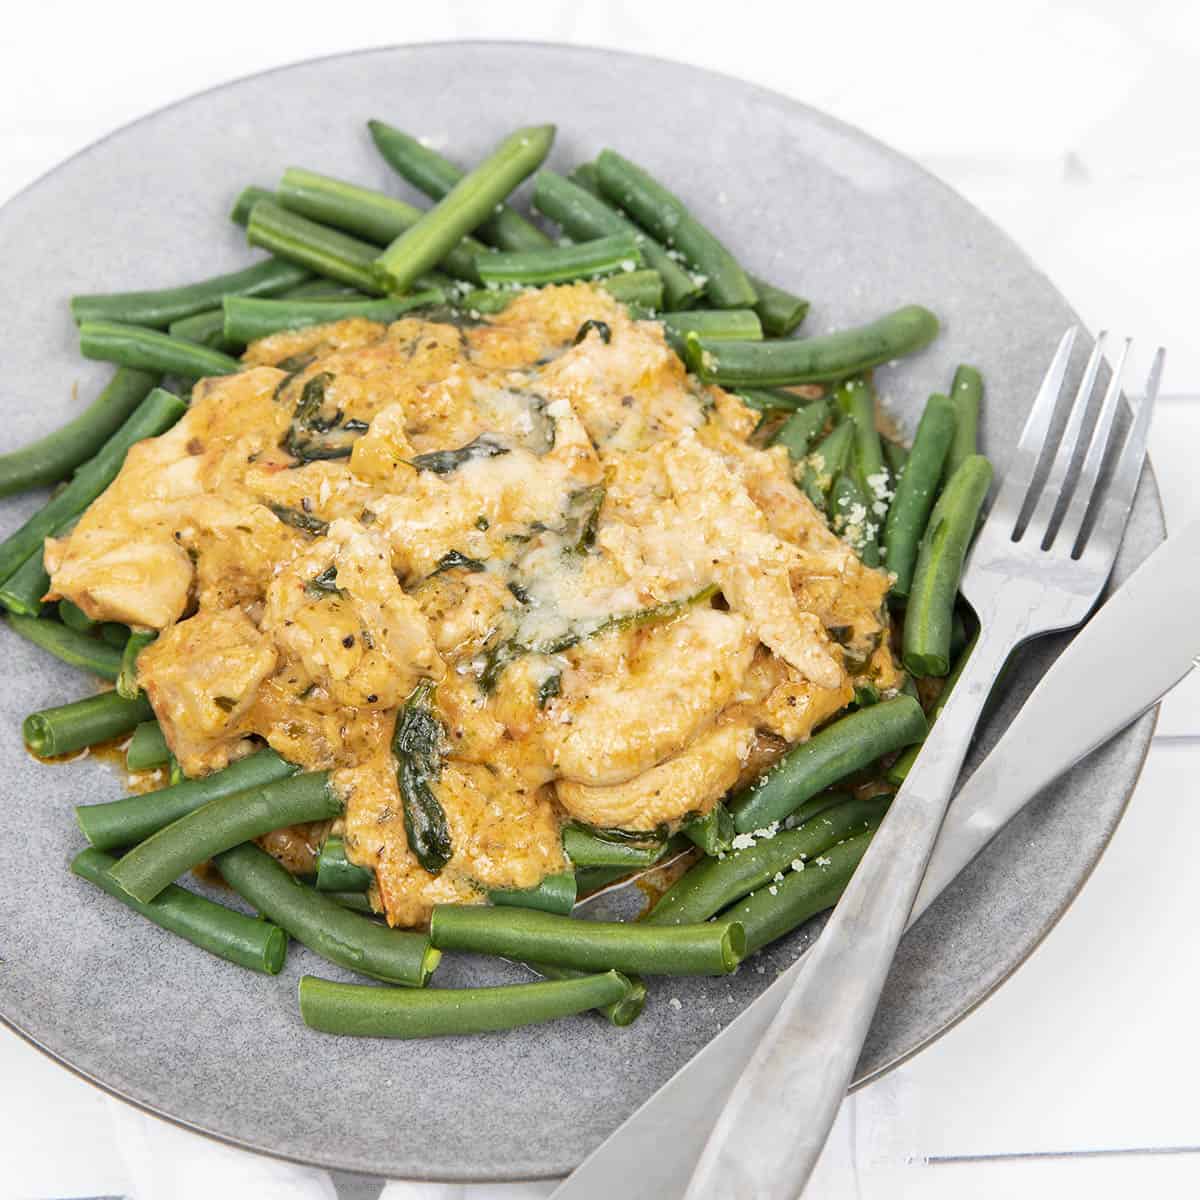 Tuscan Chicken served on a bed of green beans on a grey plate